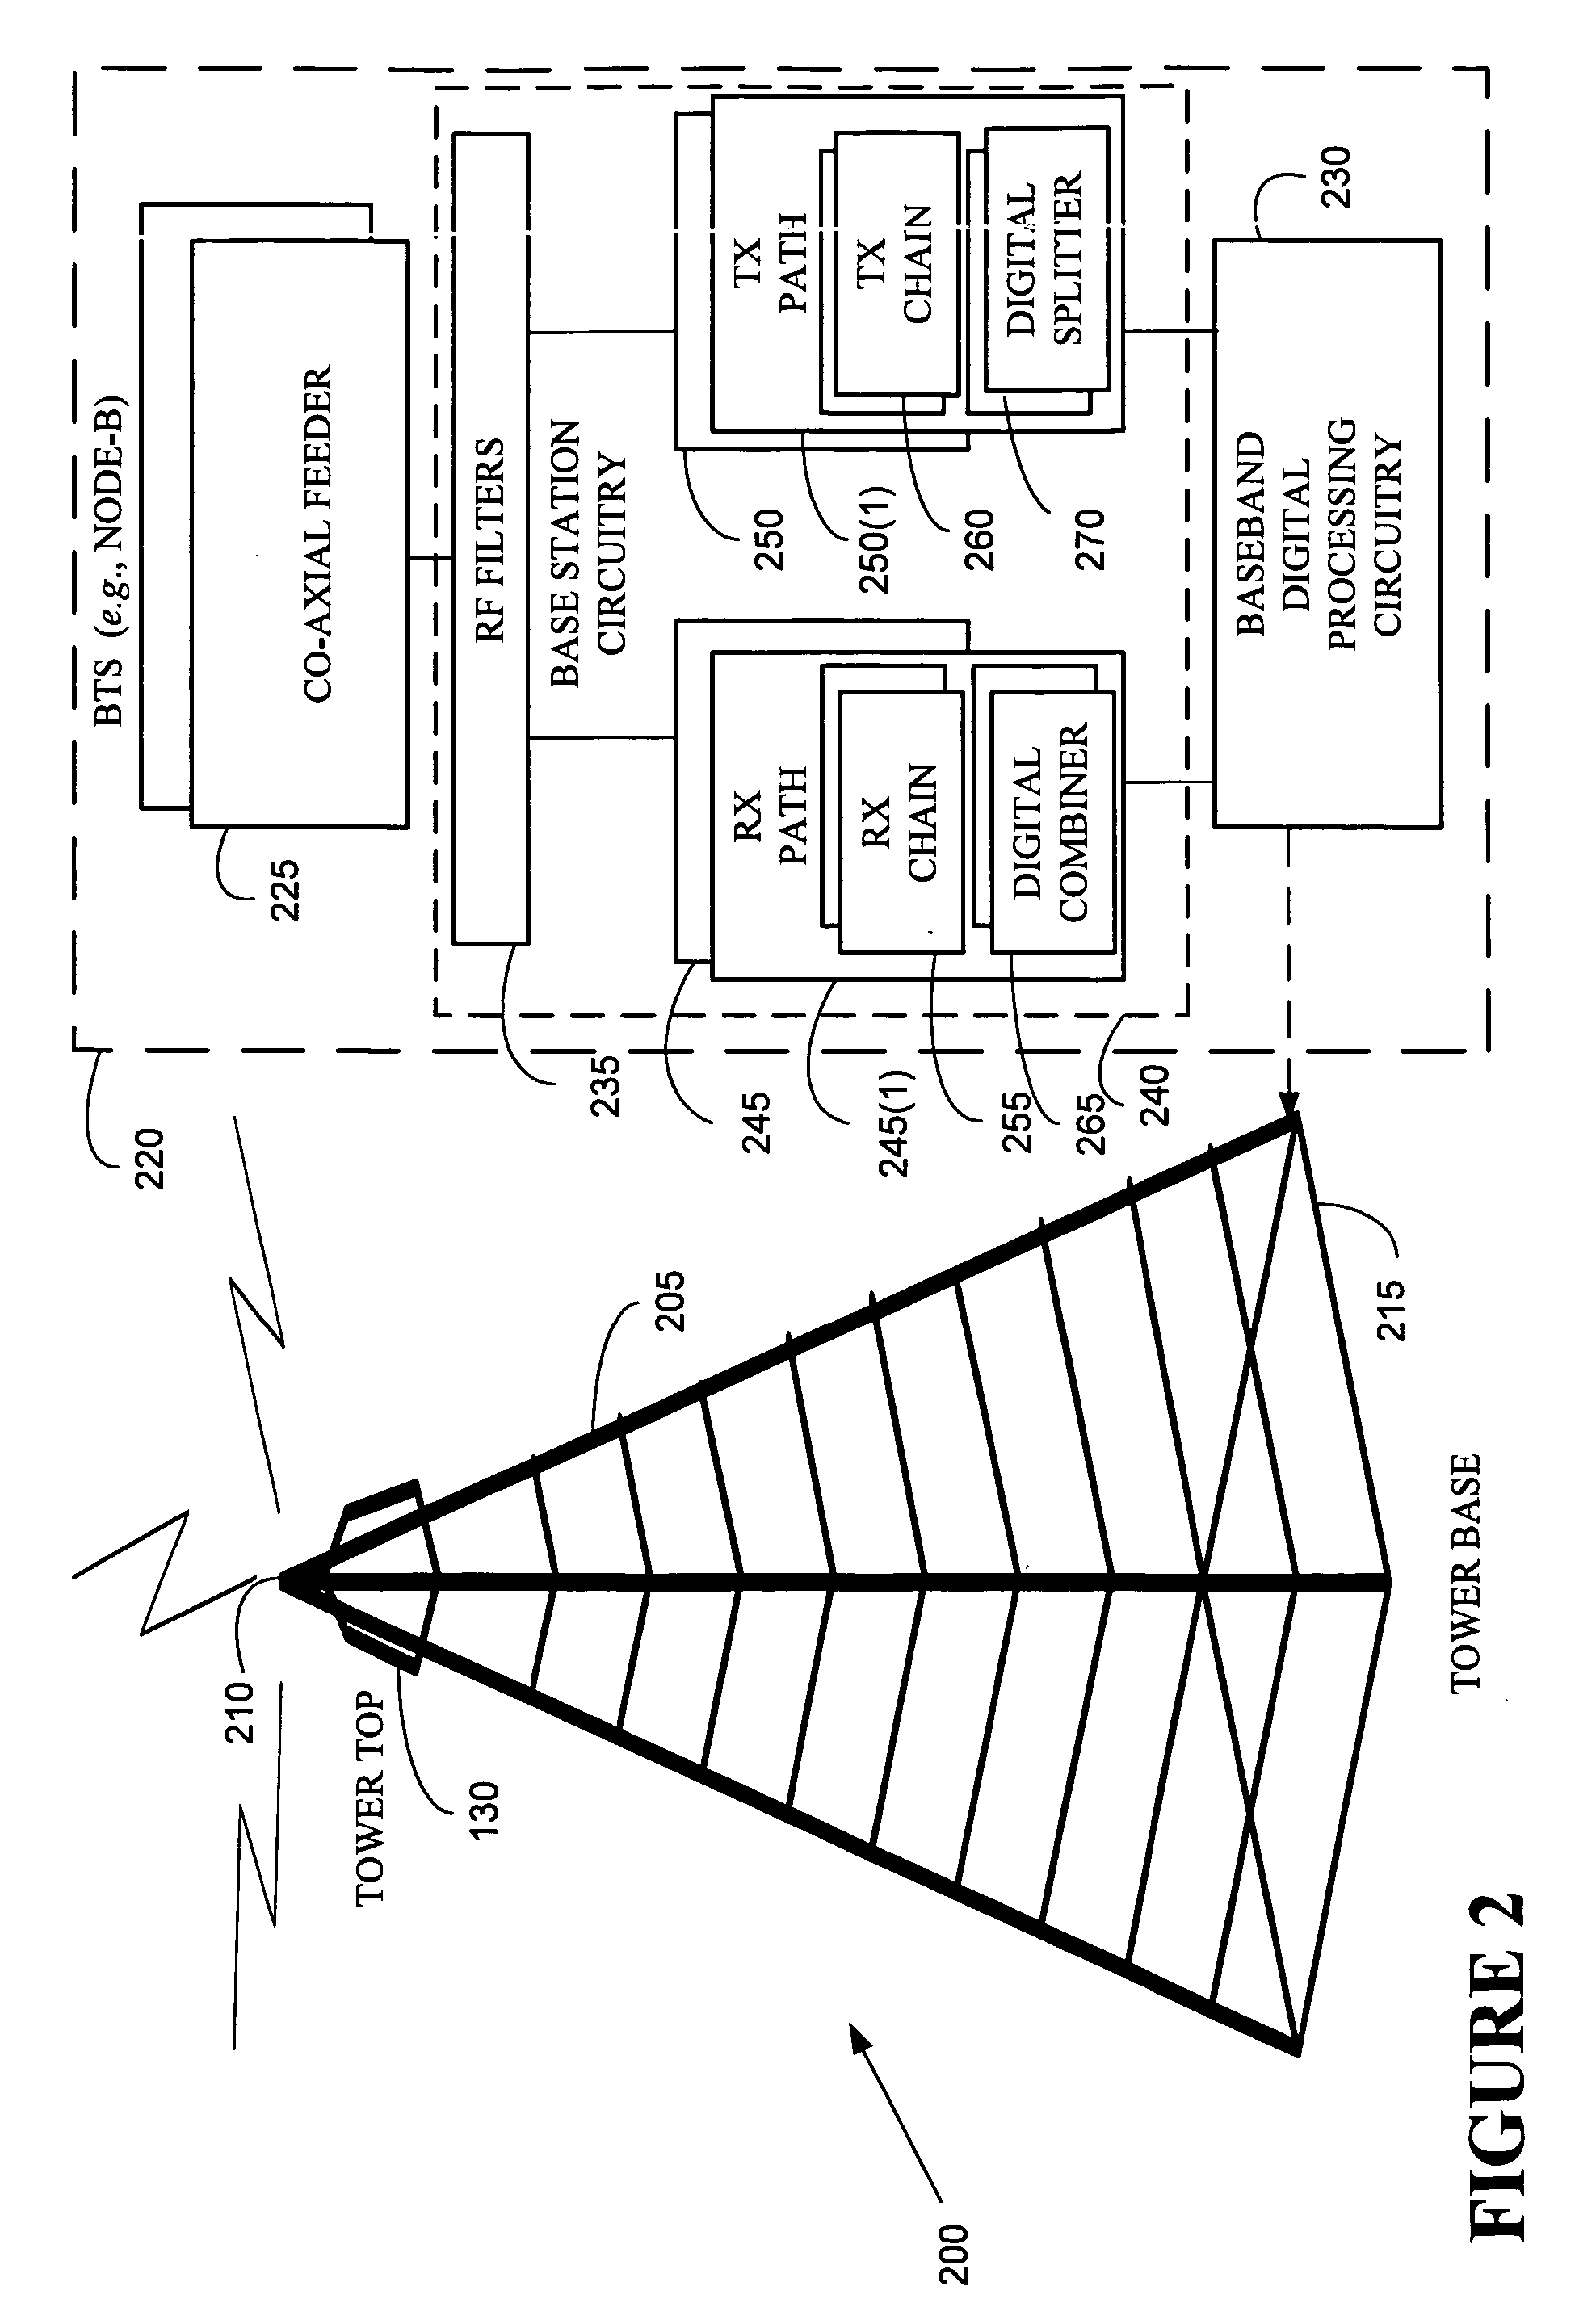 Controlling wireless communications from a multi-sector antenna of a base station